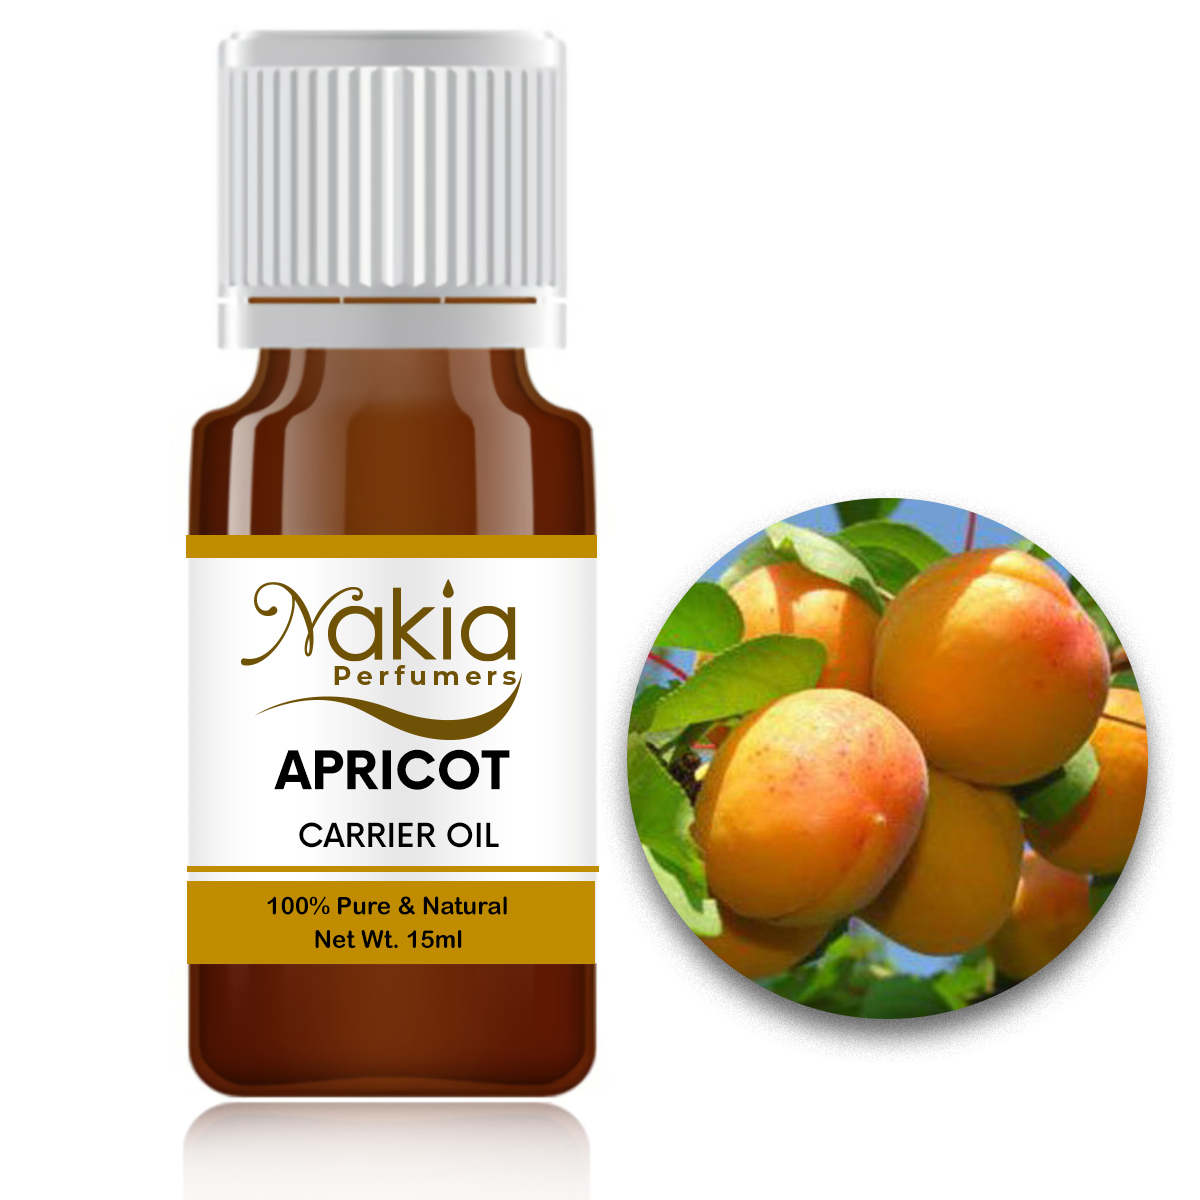 APRICOT CARRIER OIL